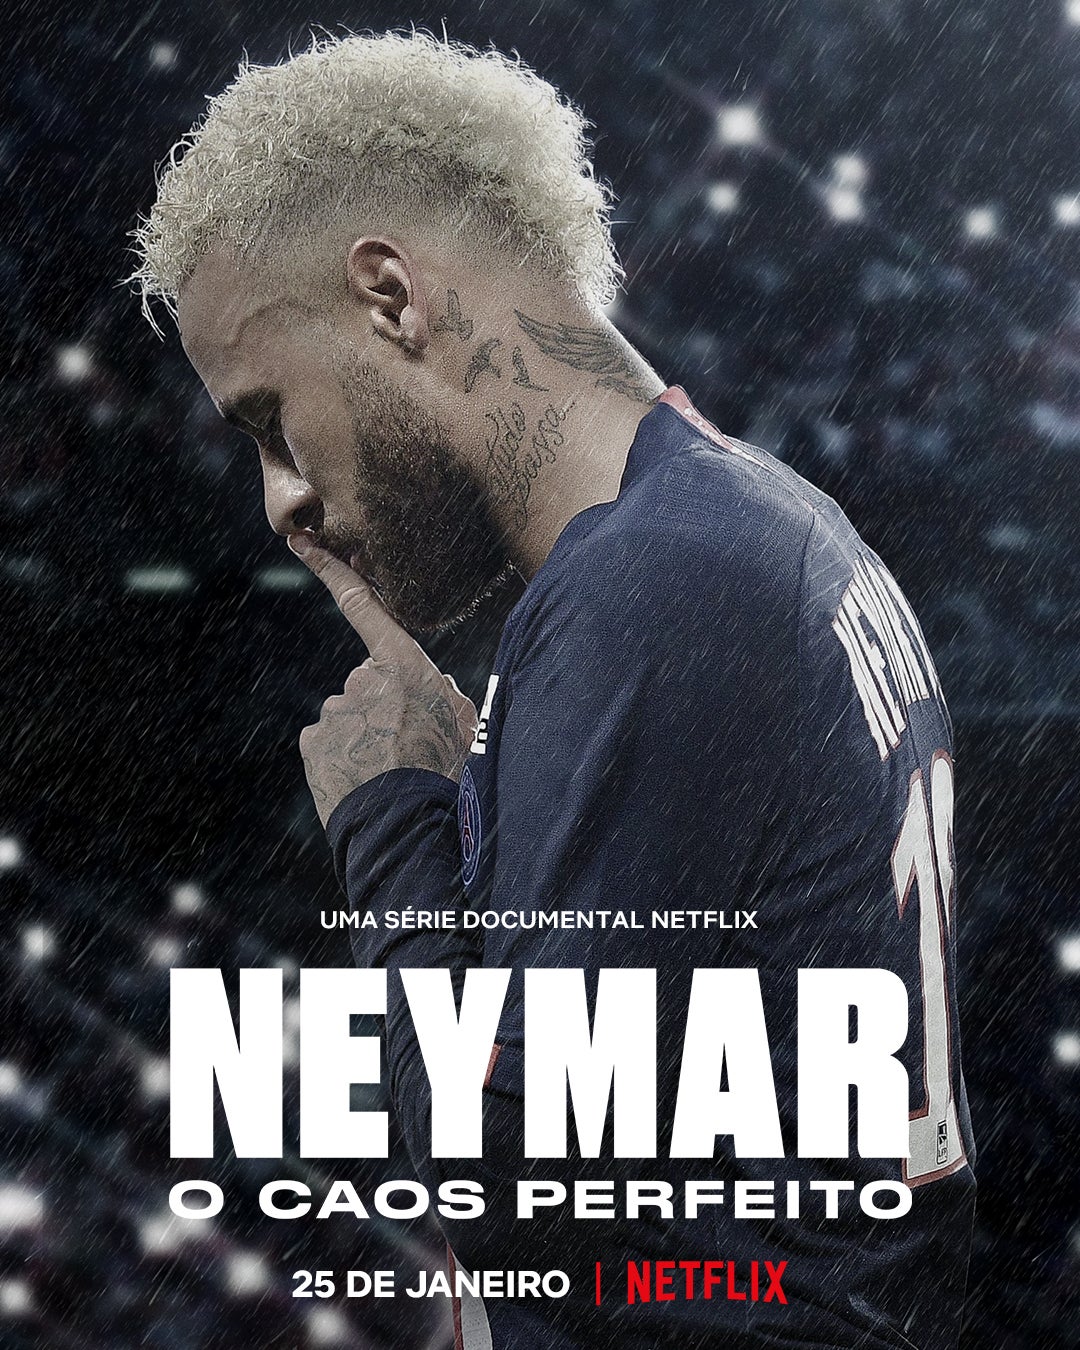 TV ratings for Neymar: The Perfect Chaos (Neymar: O Caos Perfeito) in Russia. Netflix TV series